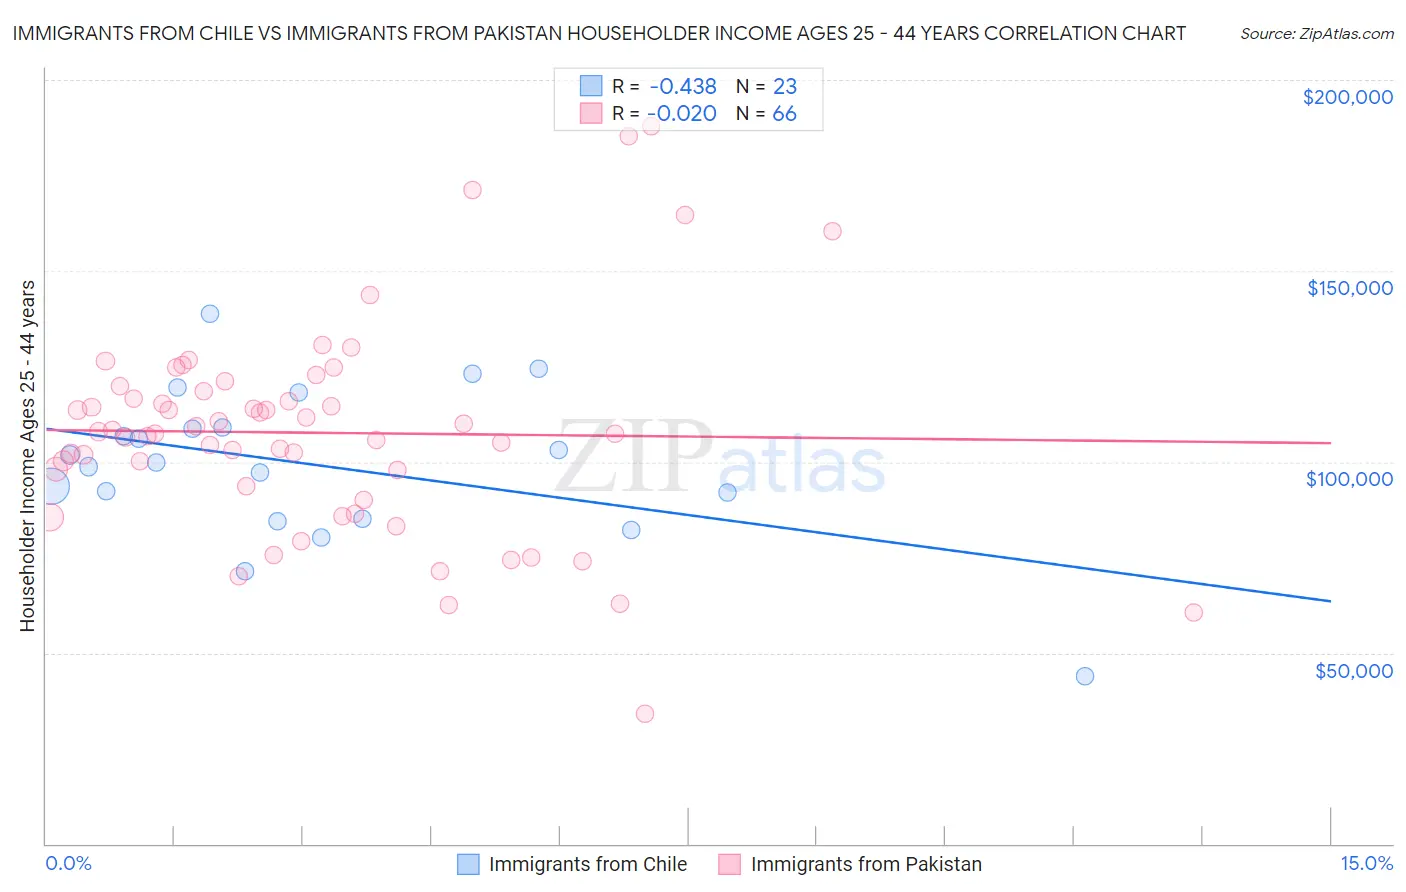 Immigrants from Chile vs Immigrants from Pakistan Householder Income Ages 25 - 44 years